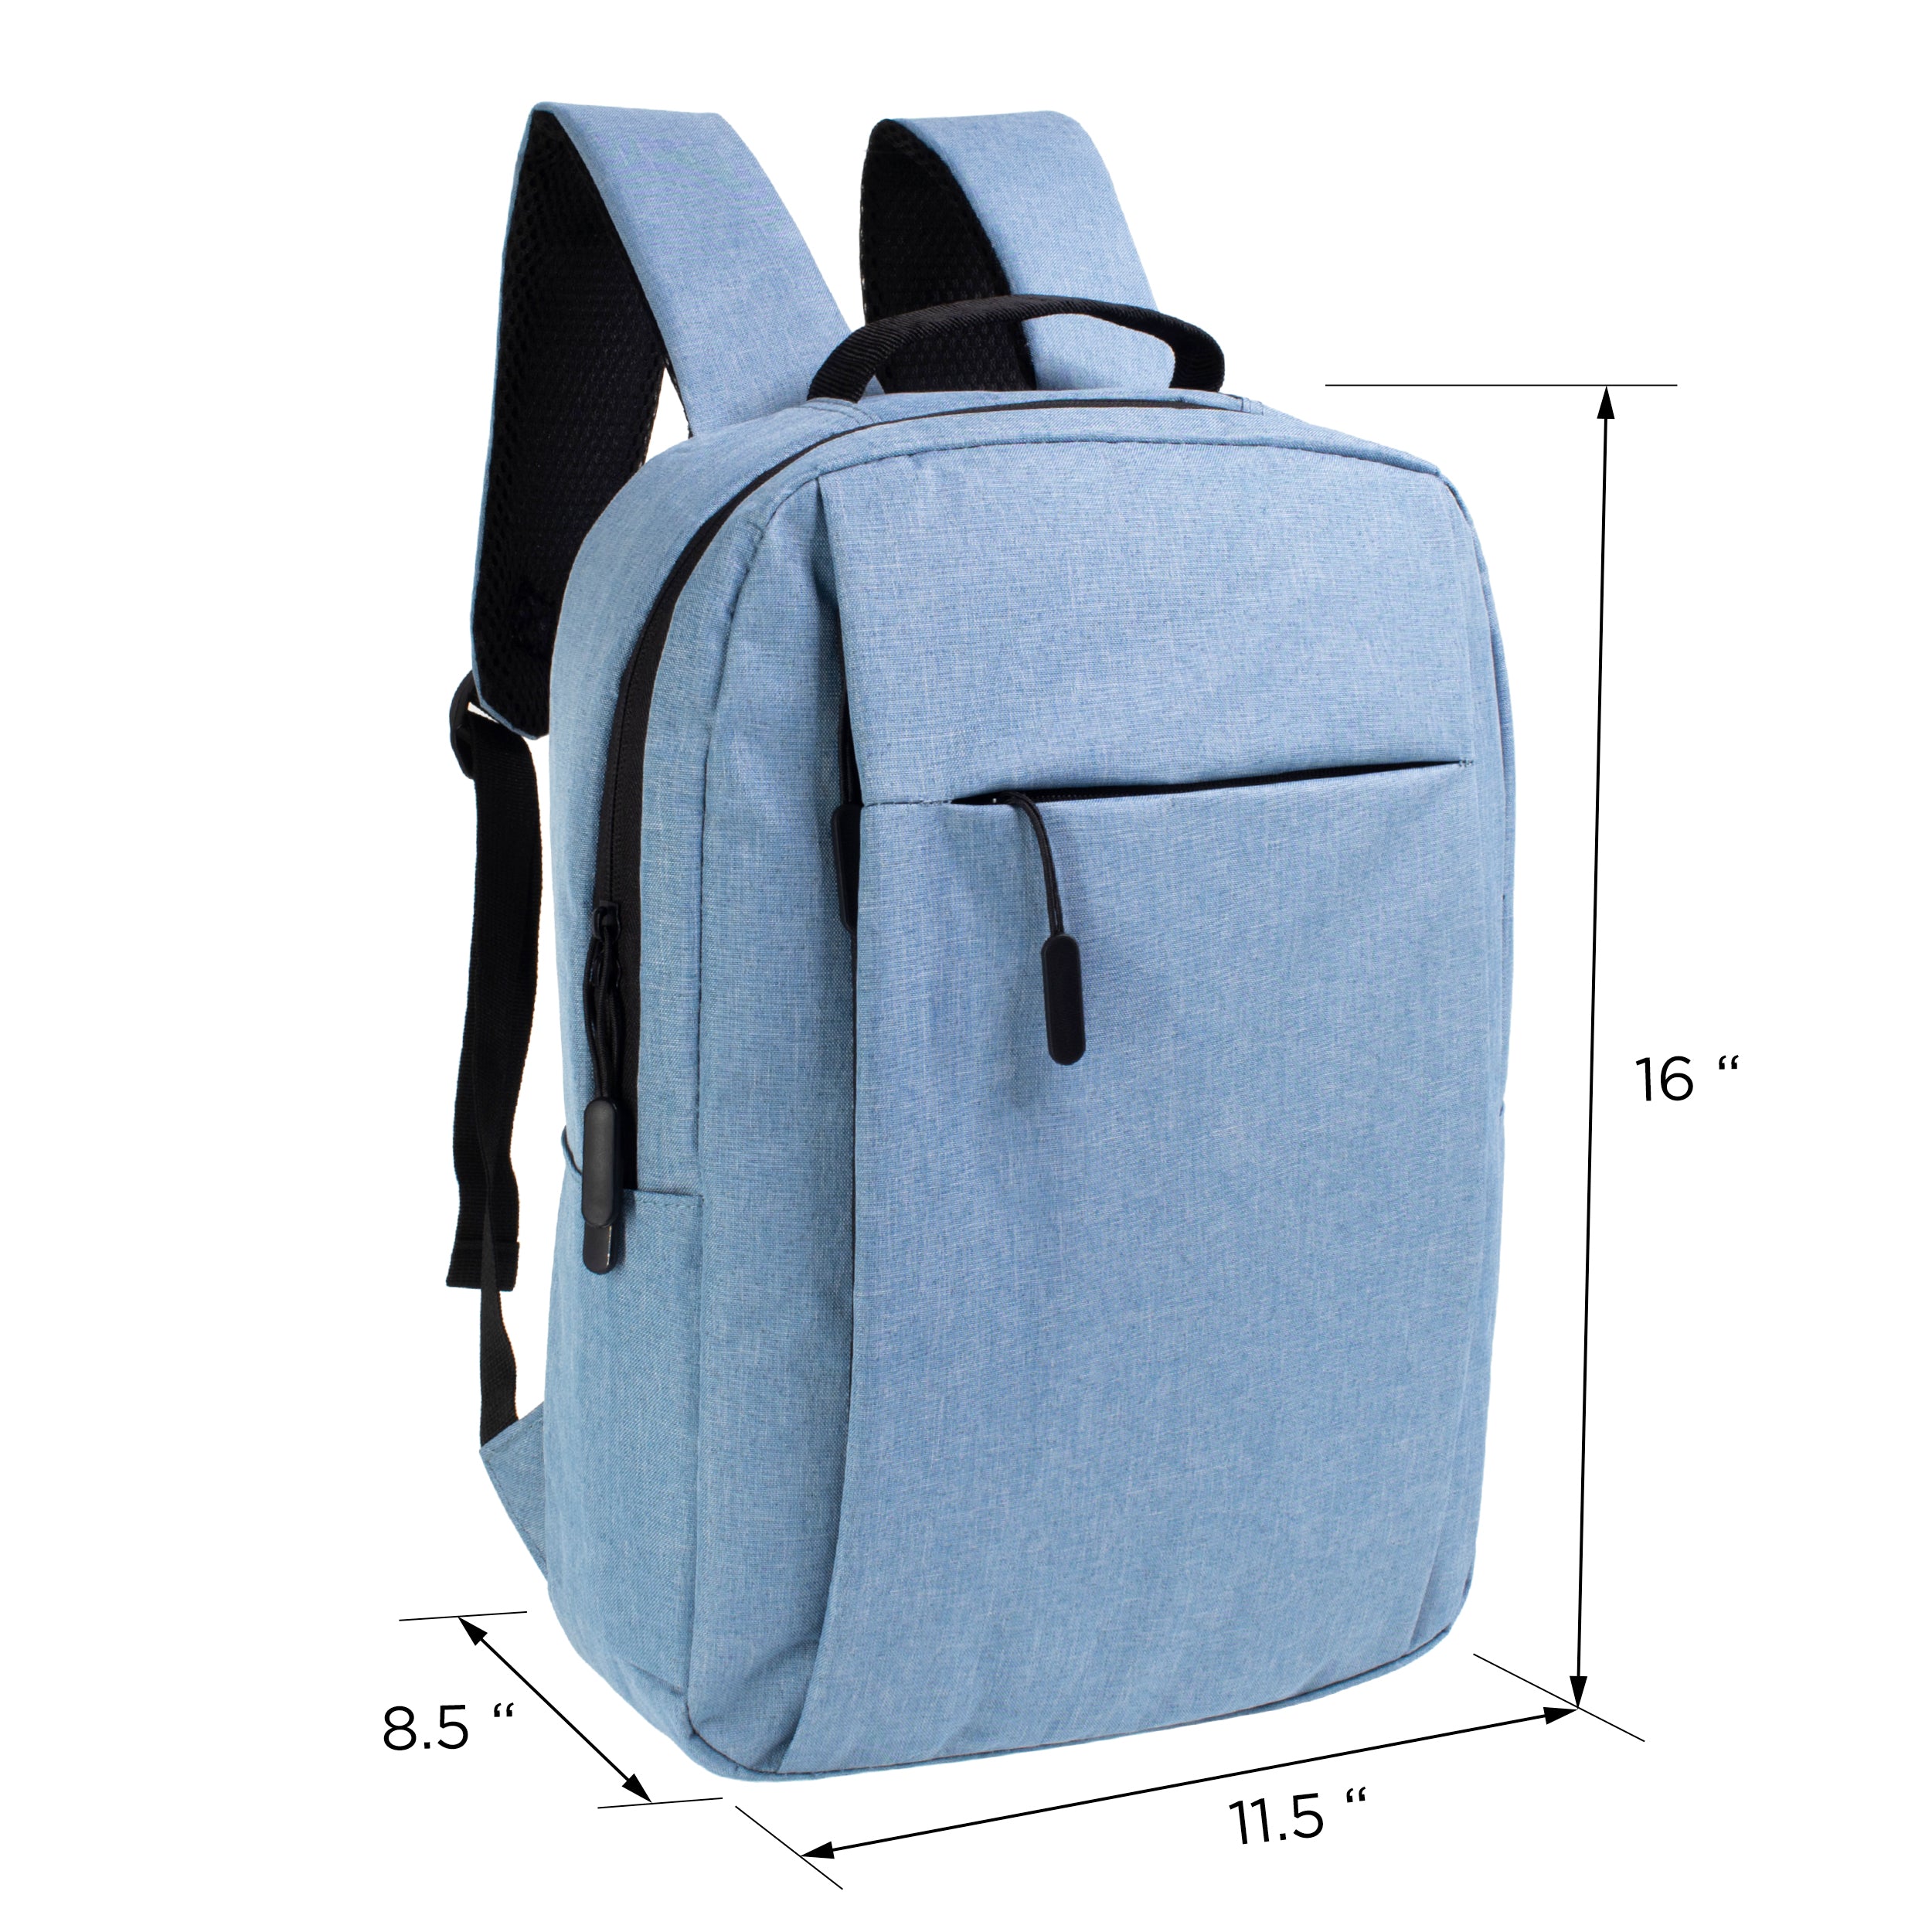 16" Wholesale Premium Backpacks in 3 Assorted Colors - Wholesale Bookbags Case of 24